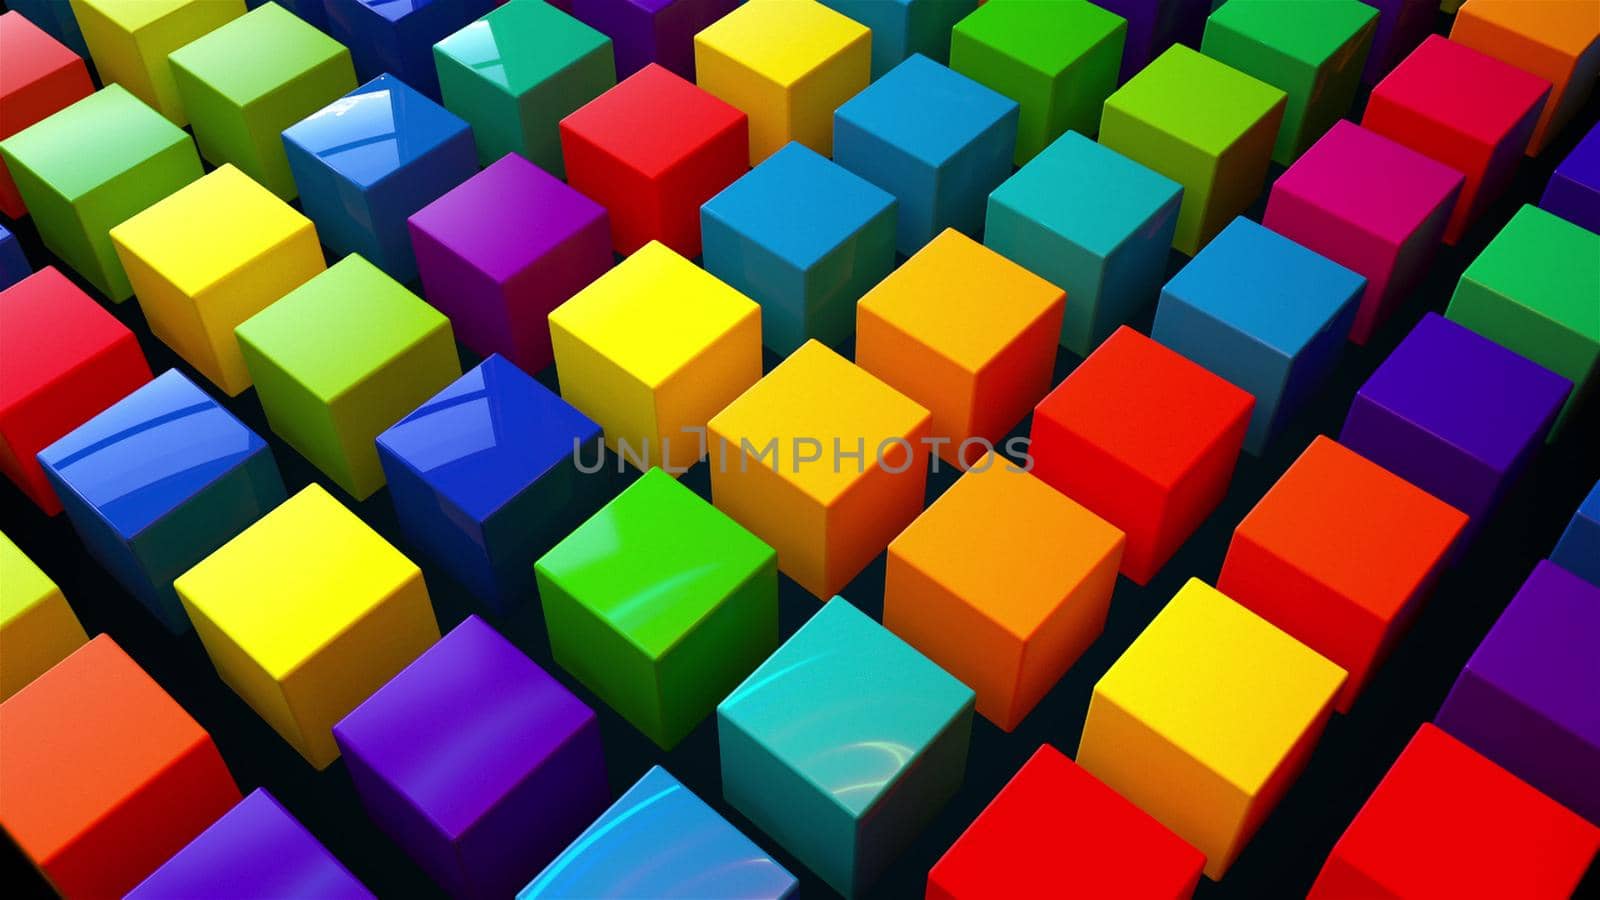 Geometric 3d render simple squares laid with lines on surface. Multicolored boxes in dynamic lighting with bright highlights. Digital wall creative presentation made of blocks